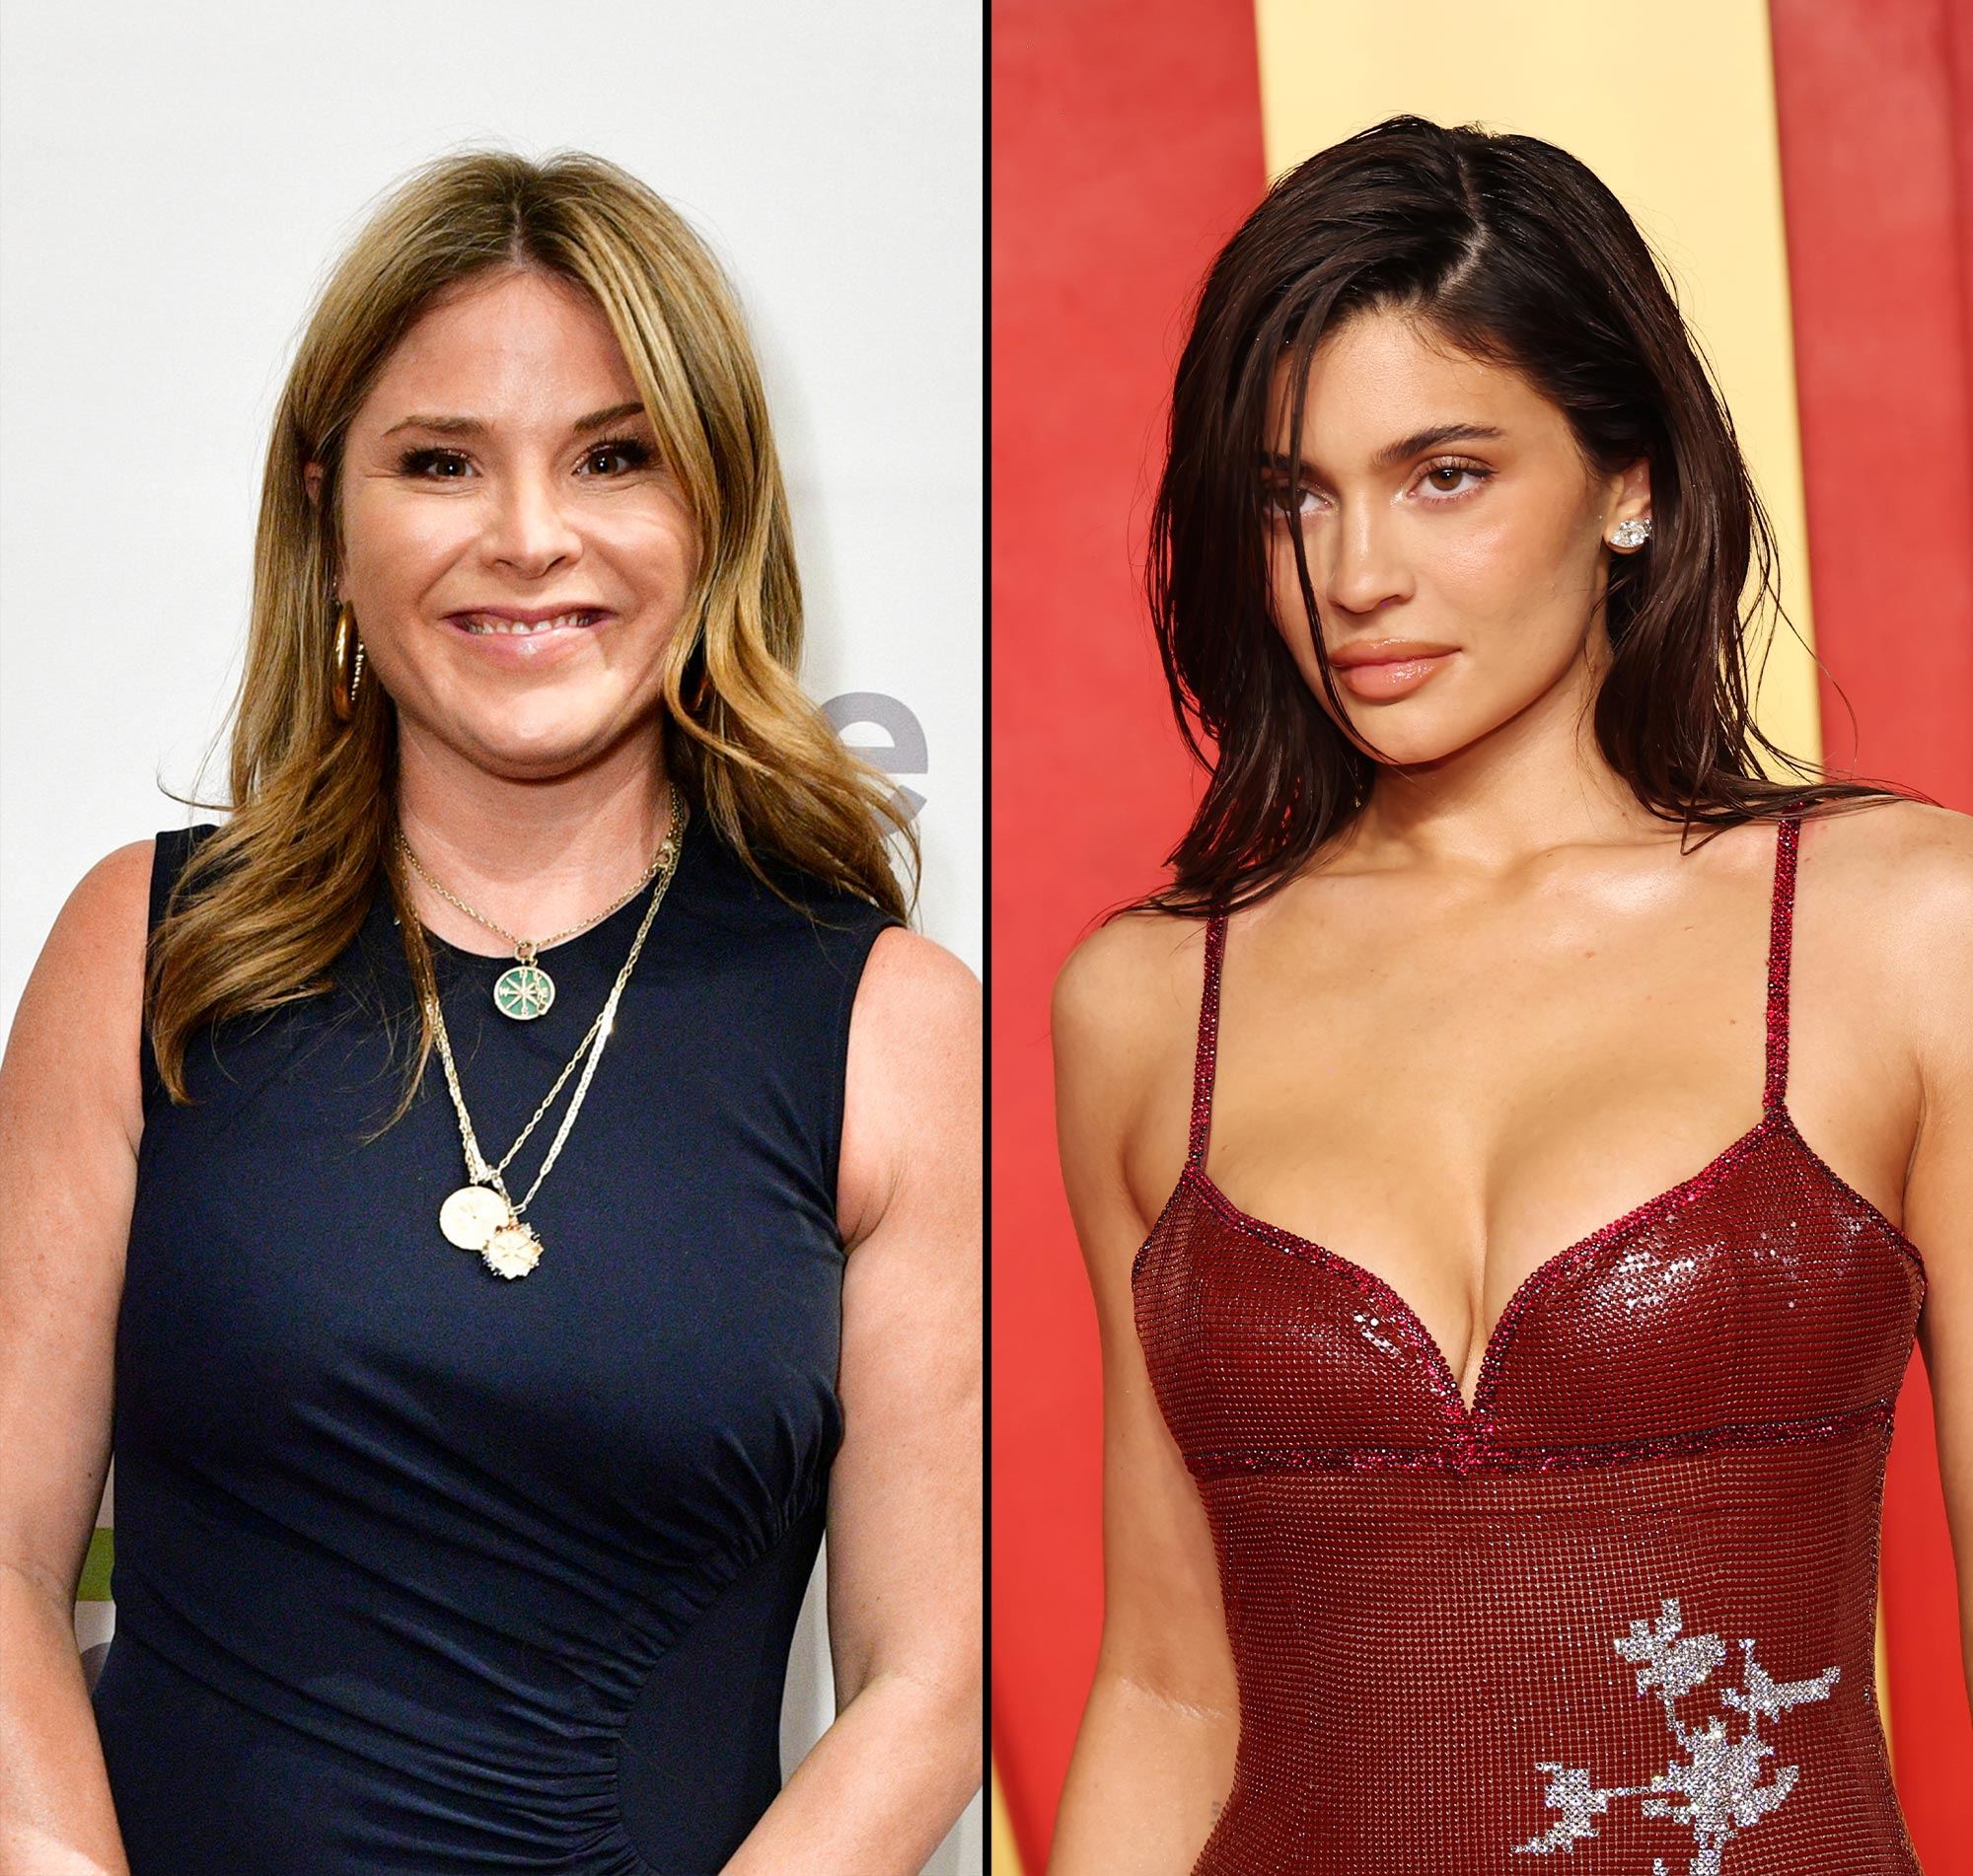 How Kylie Jenner Inspired Jenna Bush Hager's Nickname From Her Daughter